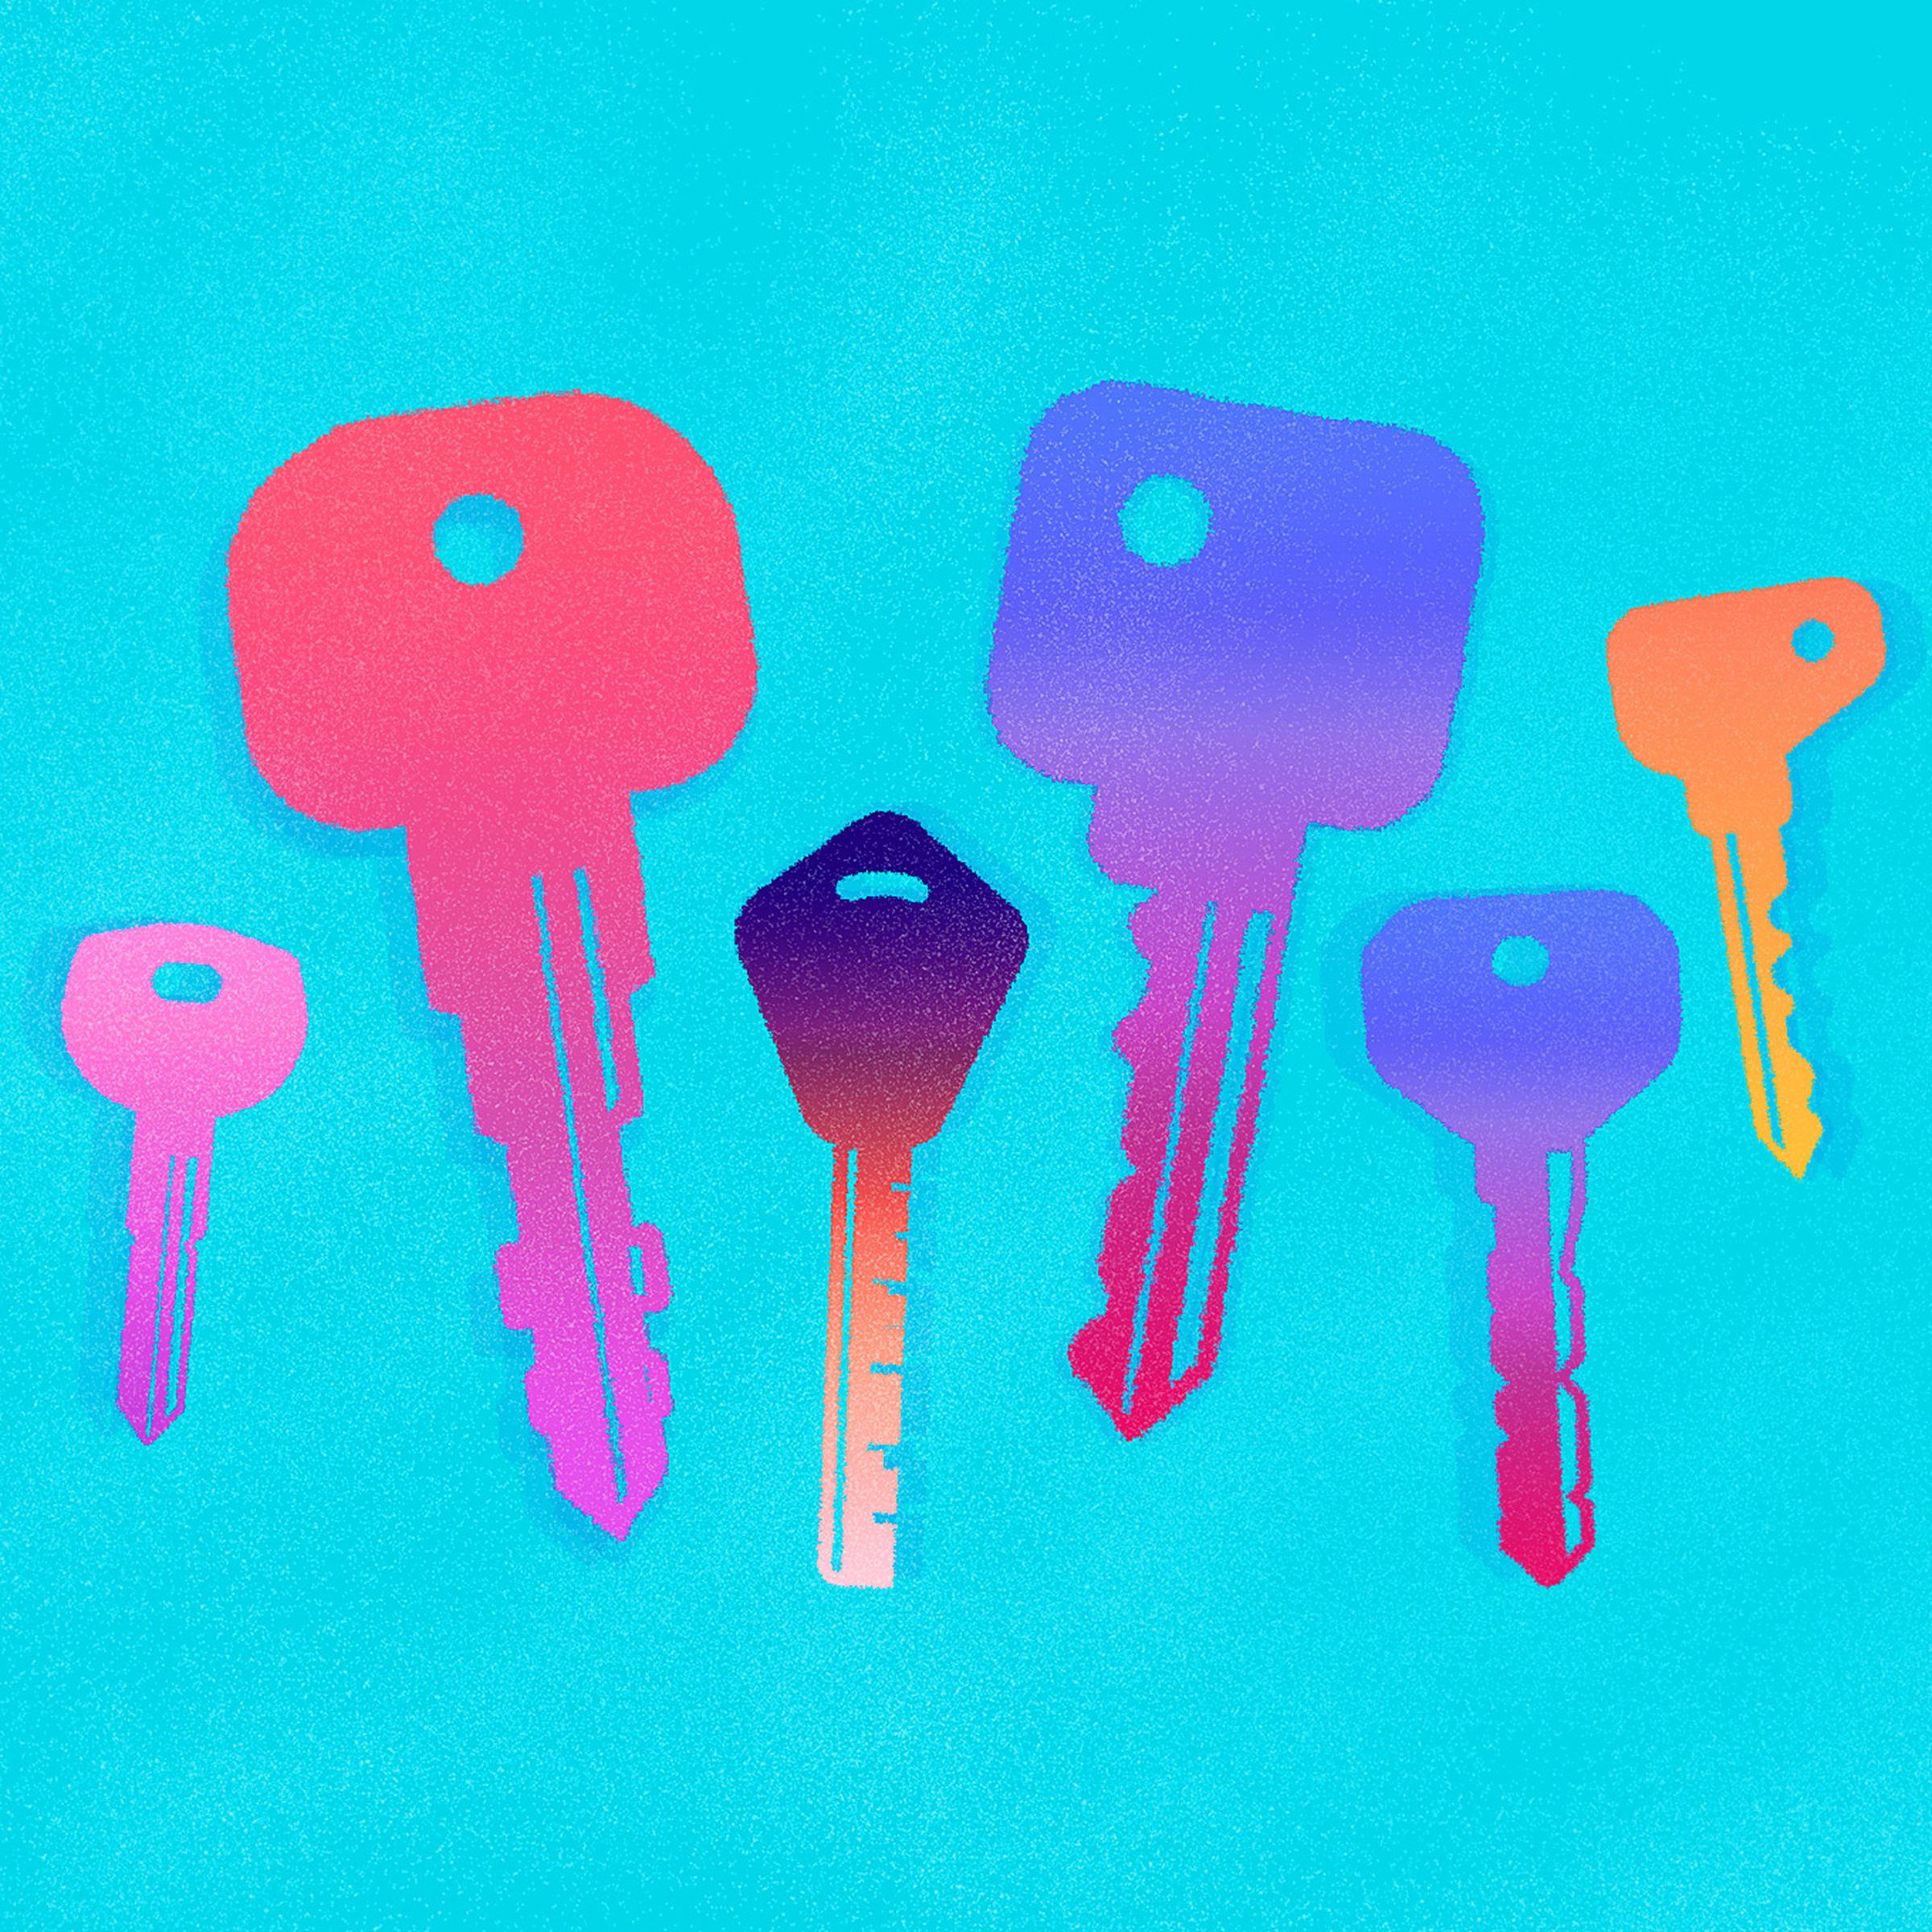 Illustration showing six different multicolored door keys on a light blue background.